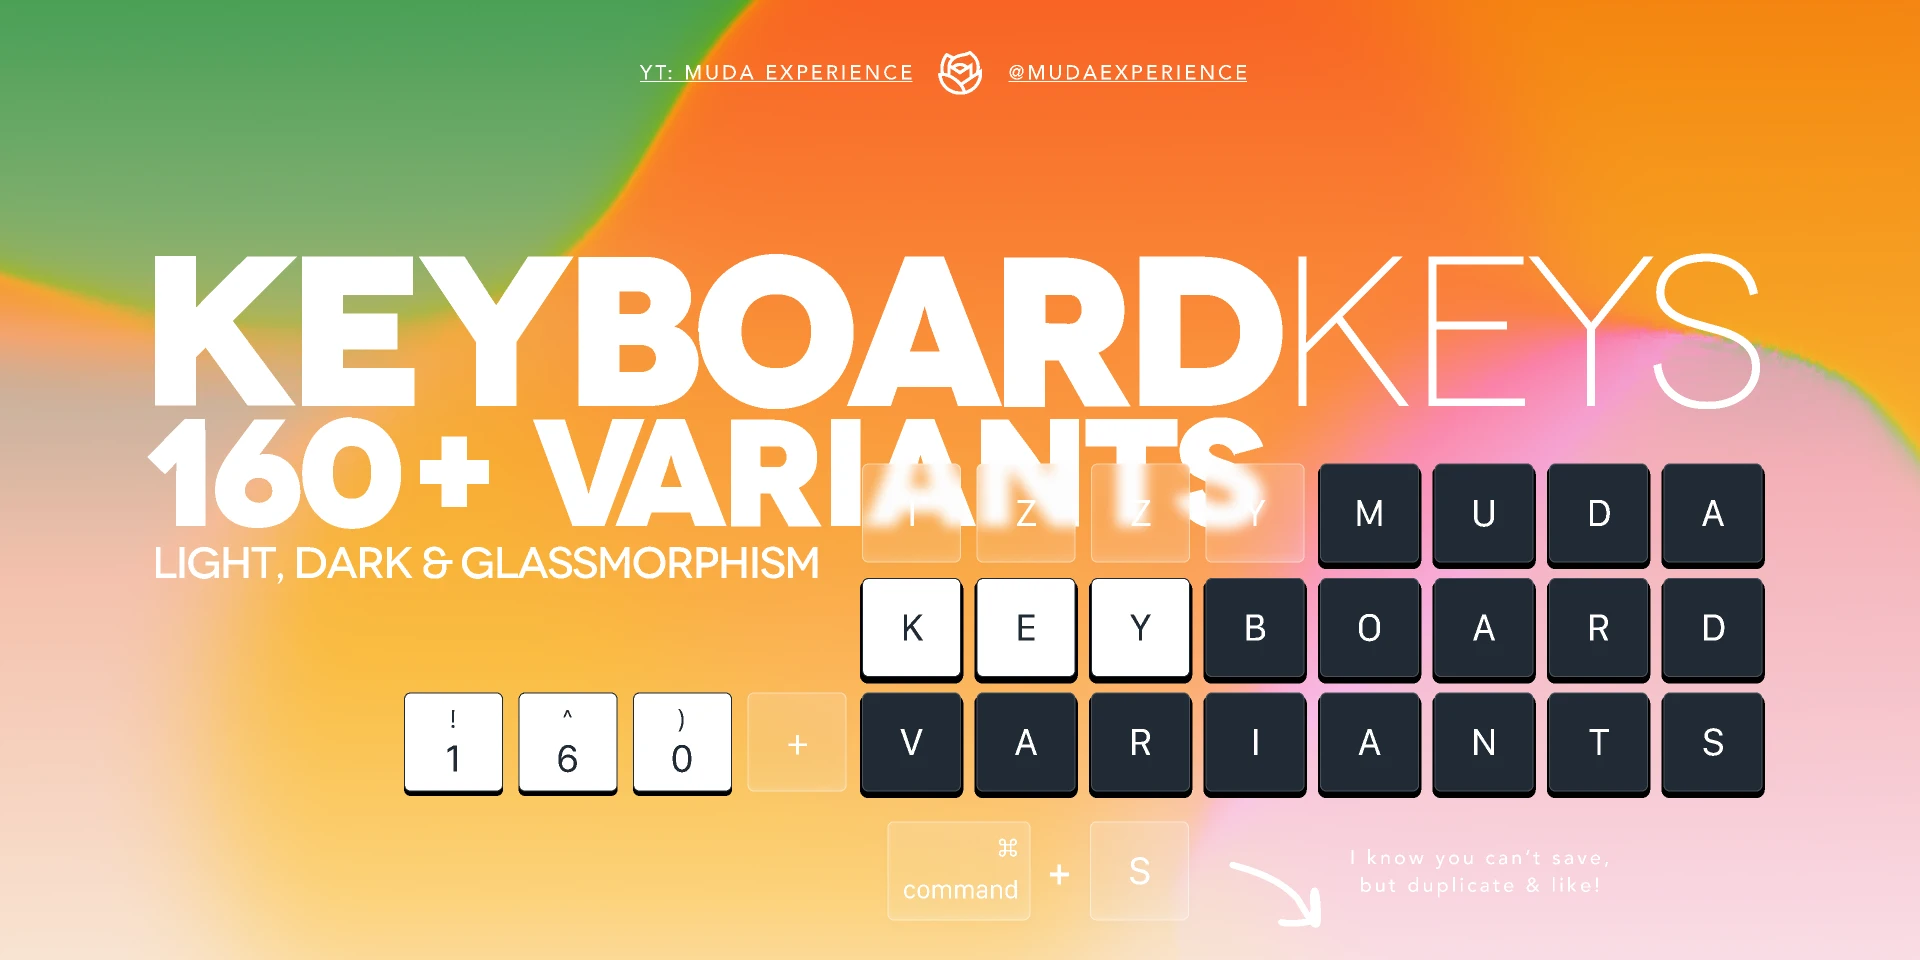 Keyboard Keys (with Variants) for Figma and Adobe XD